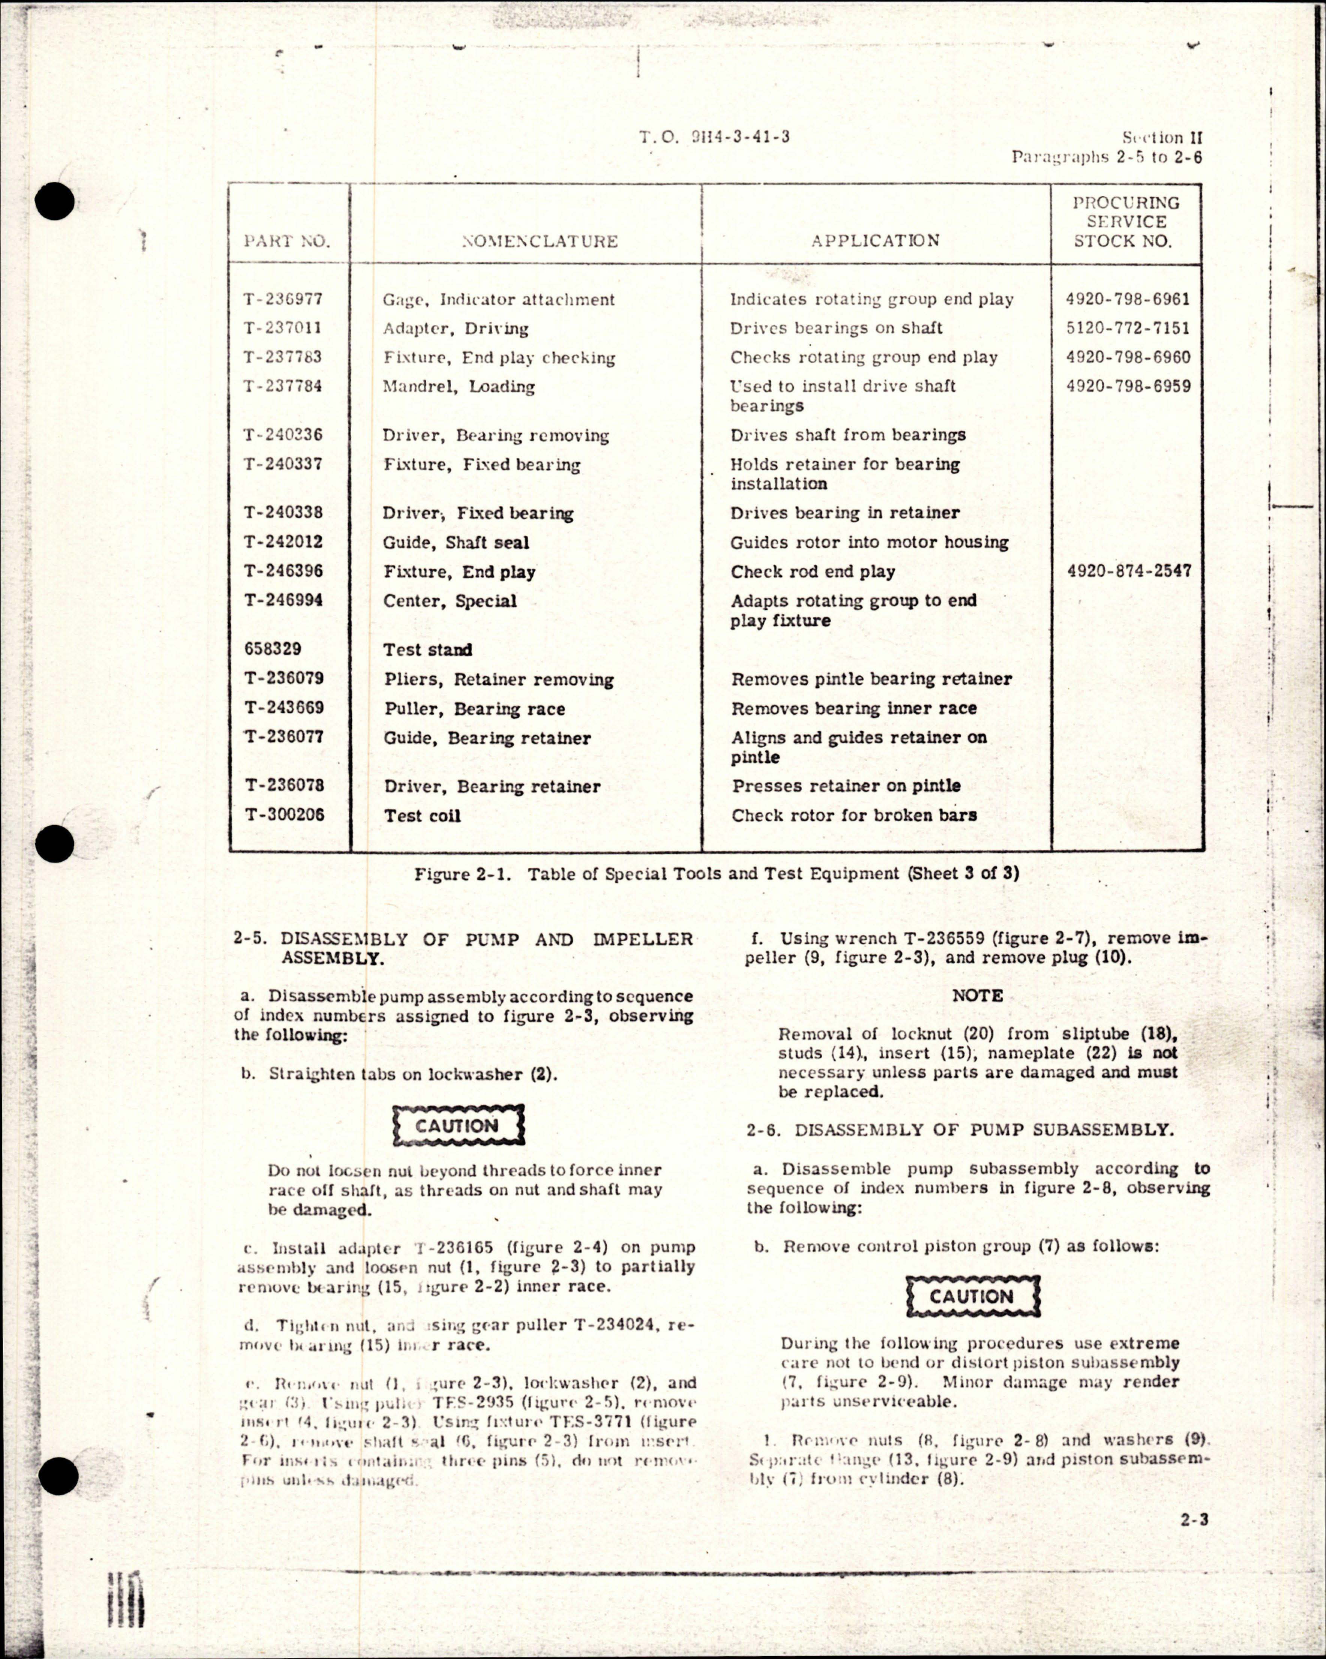 Sample page 9 from AirCorps Library document: Overhaul Instructions for Electrically Driven Hydraulic Motorpump - Change No. 8 